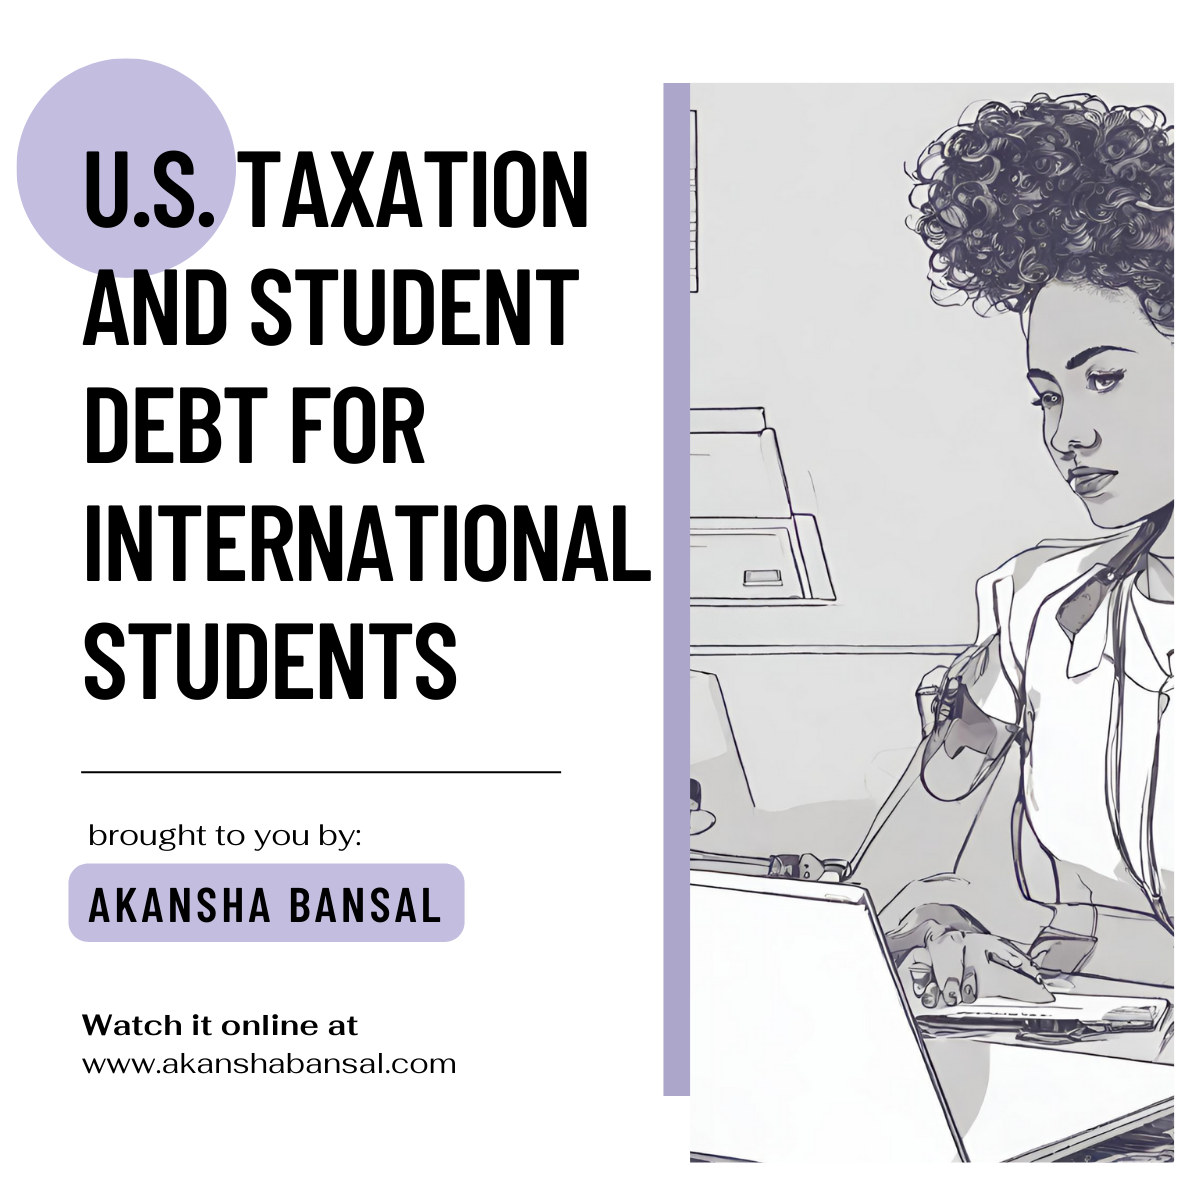 How to Guide For Student Debt + International Taxation